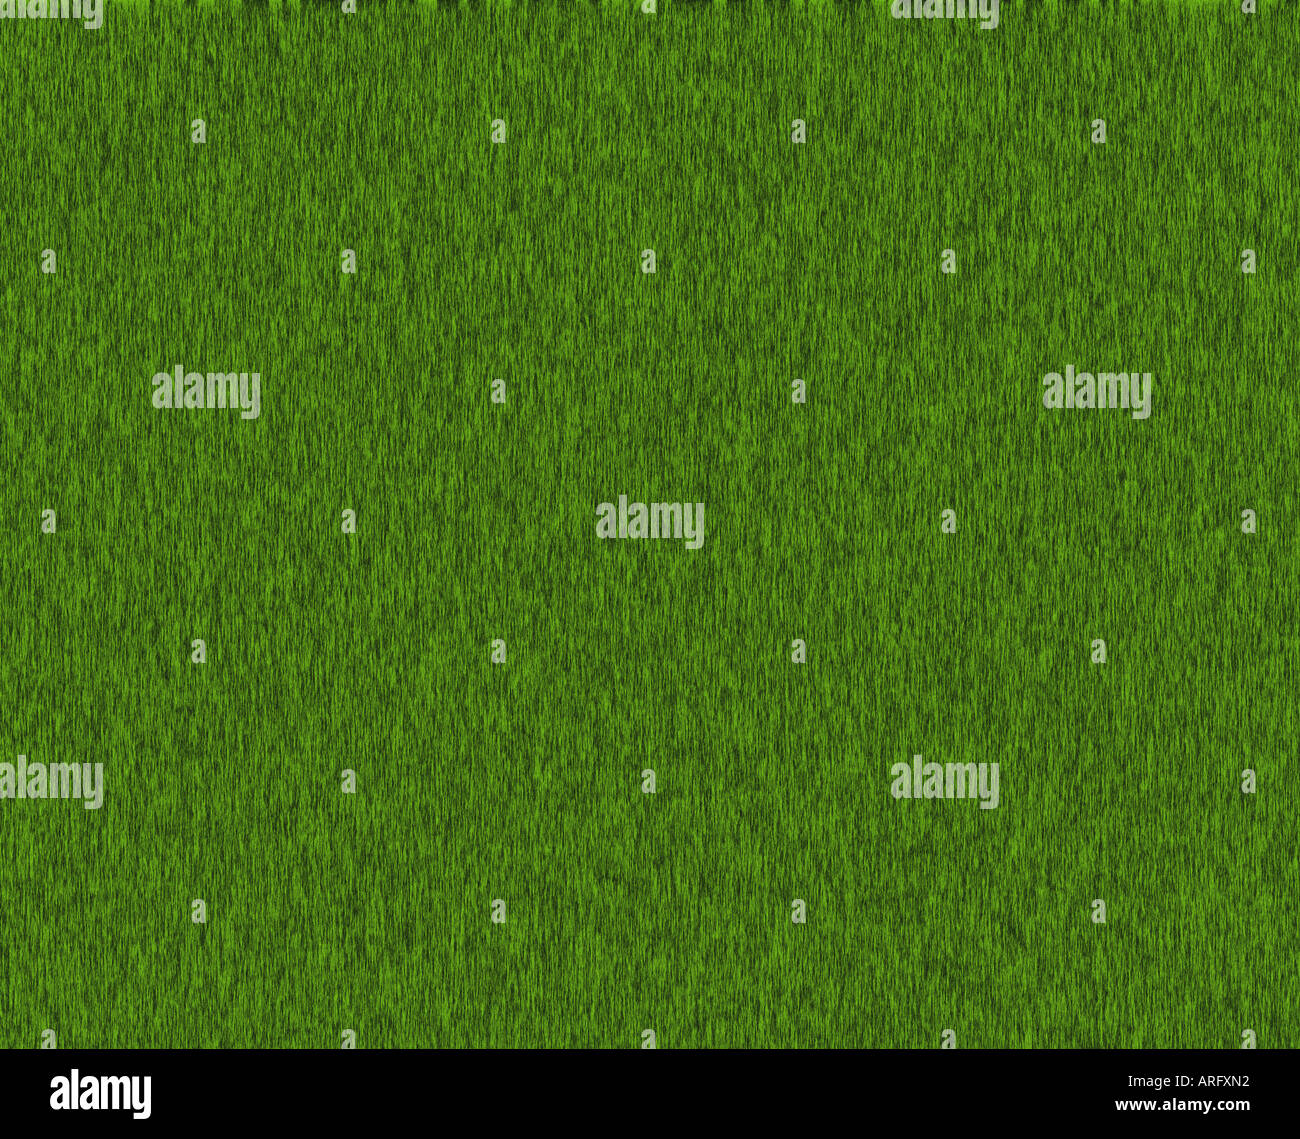 ABSTRACT GREEN BACKGROUND WITH GRASS PATTERN Stock Photo